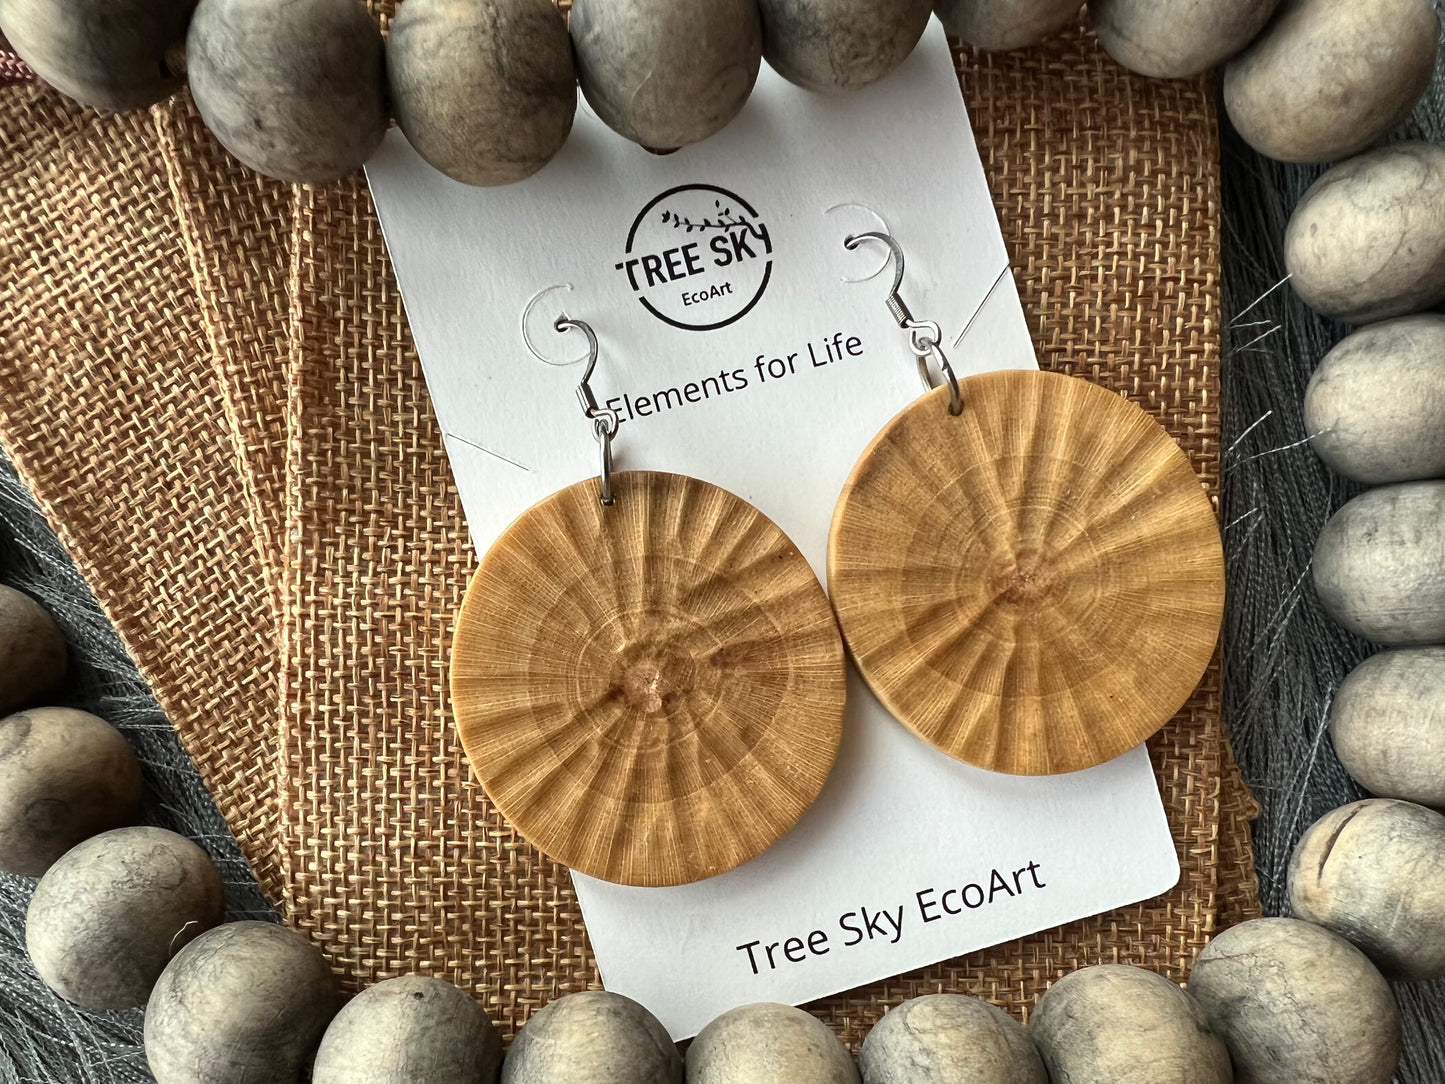 Creative Muse textured circle earrings